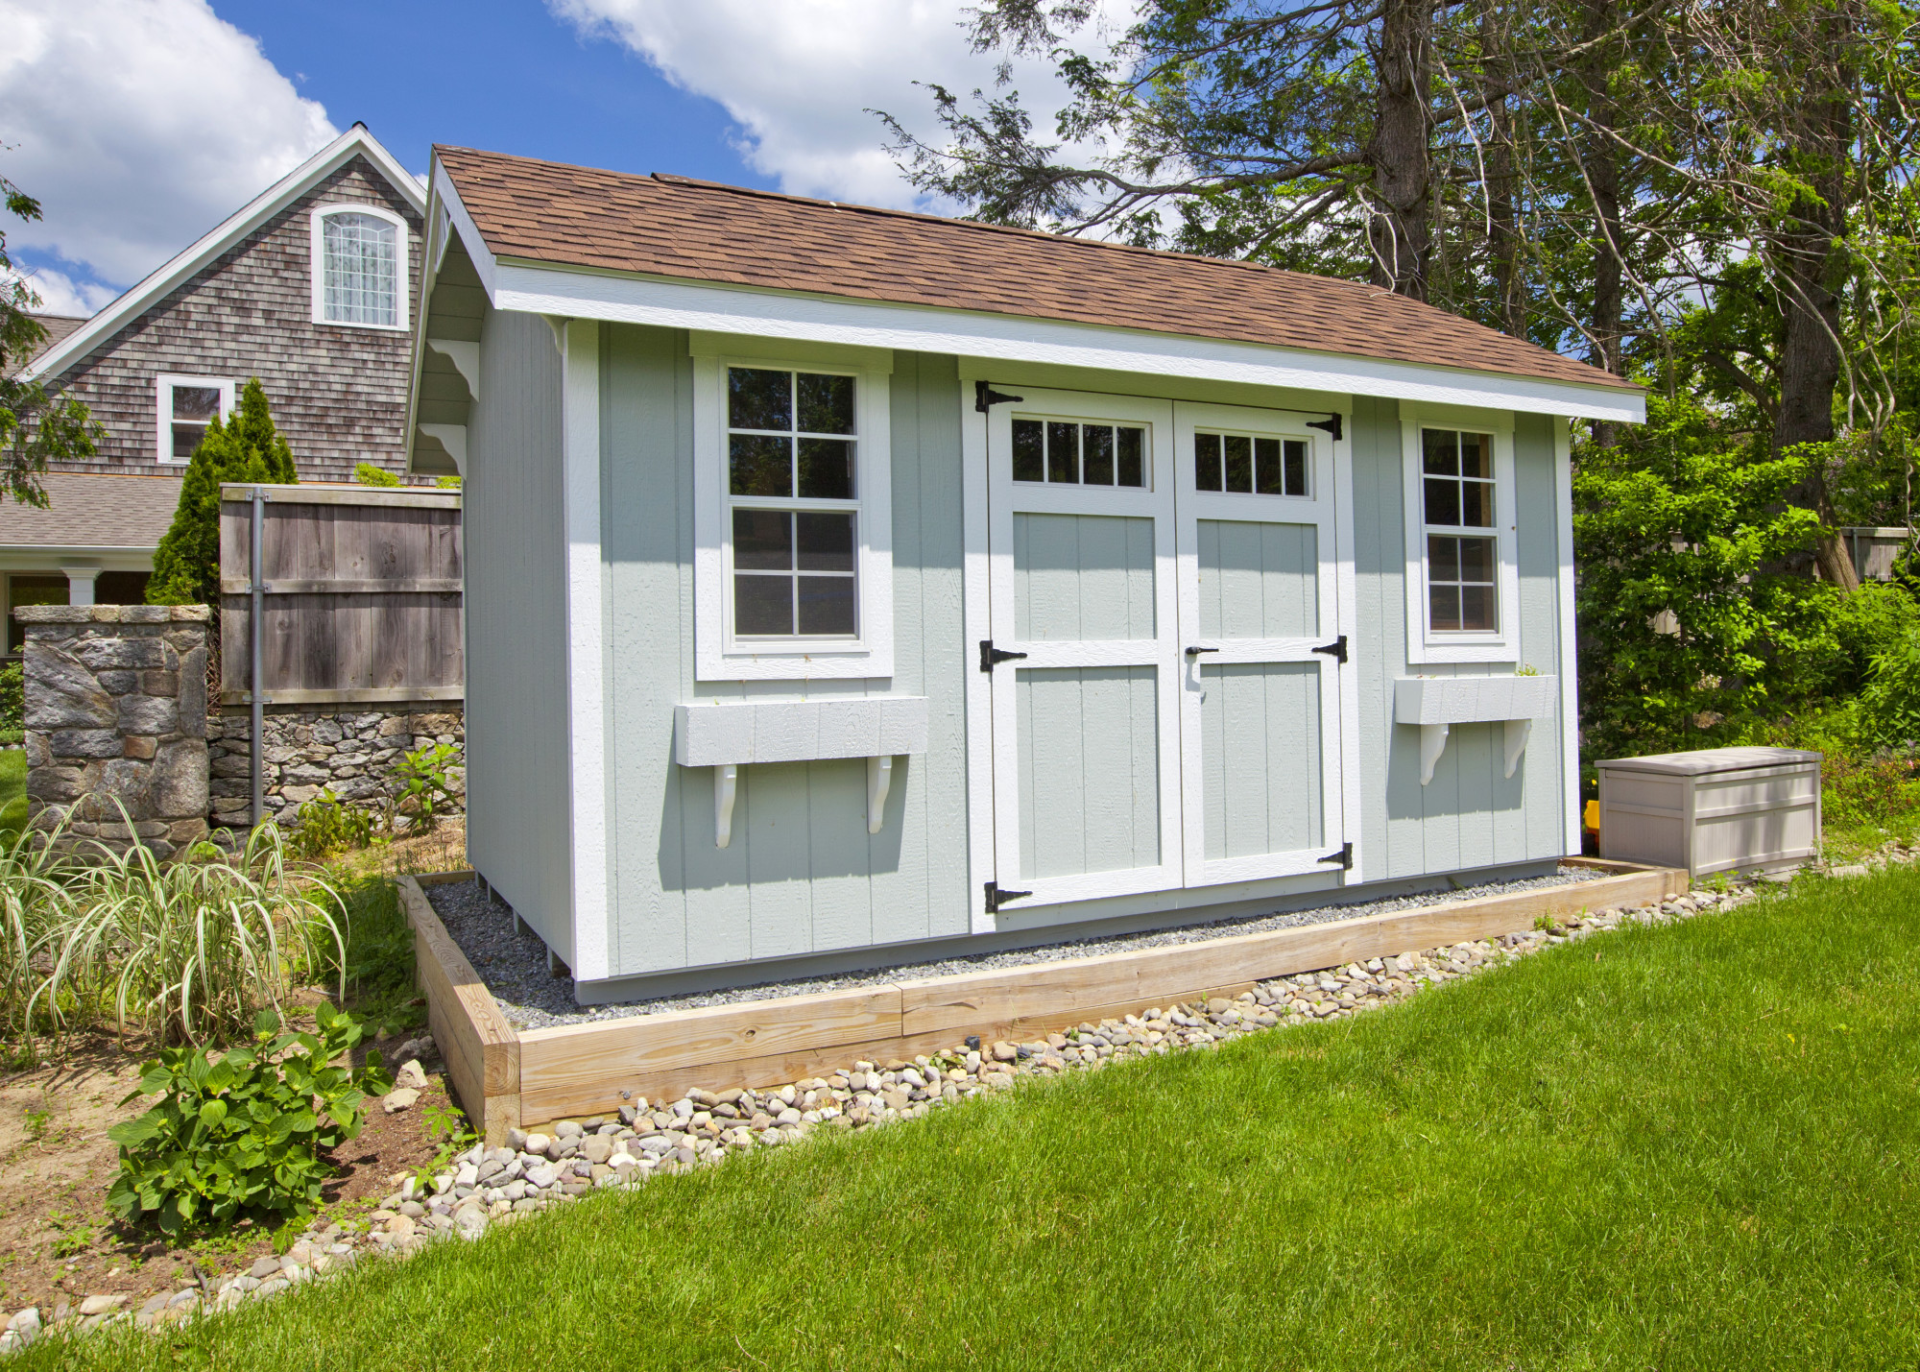 5 storage shed organization ideas to make the most of your space | AZ